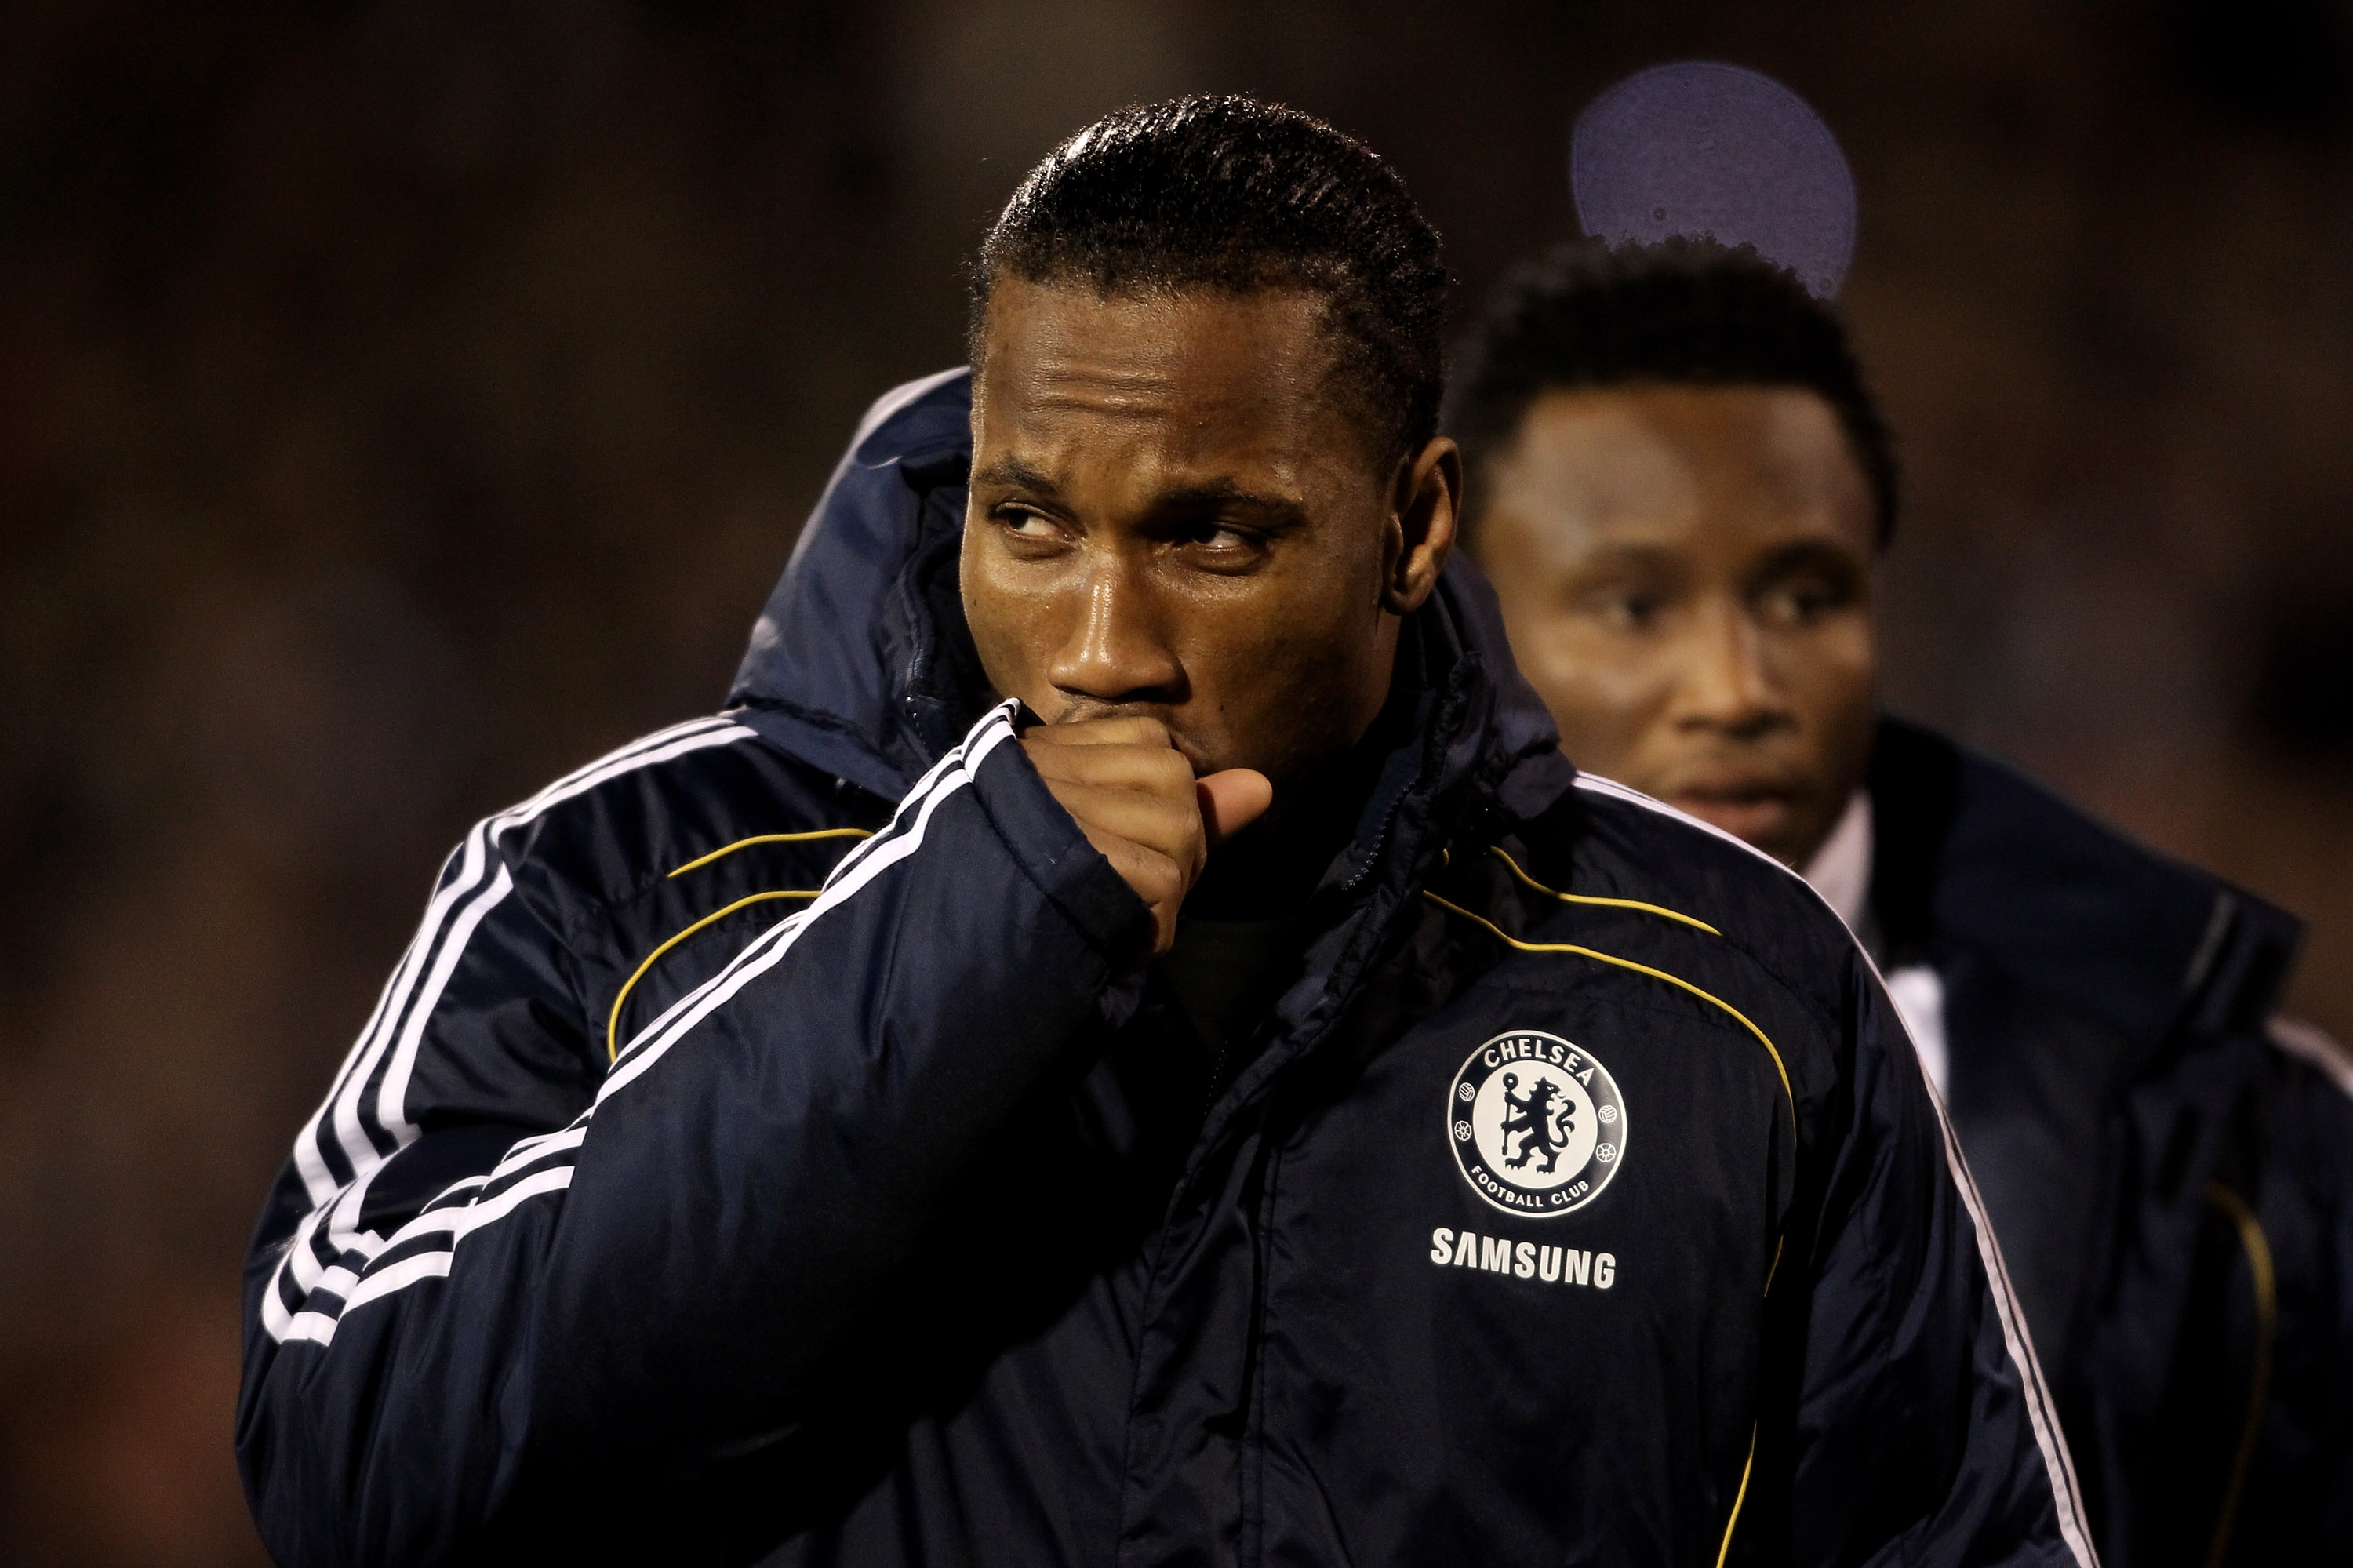 LONDON, ENGLAND - FEBRUARY 14:  Didier Drogba of Chelsea makes his way to the bench prior to the Barclays Premier League match between Fulham and Chelsea at Craven Cottage on February 14, 2011 in London, England.  (Photo by Scott Heavey/Getty Images)